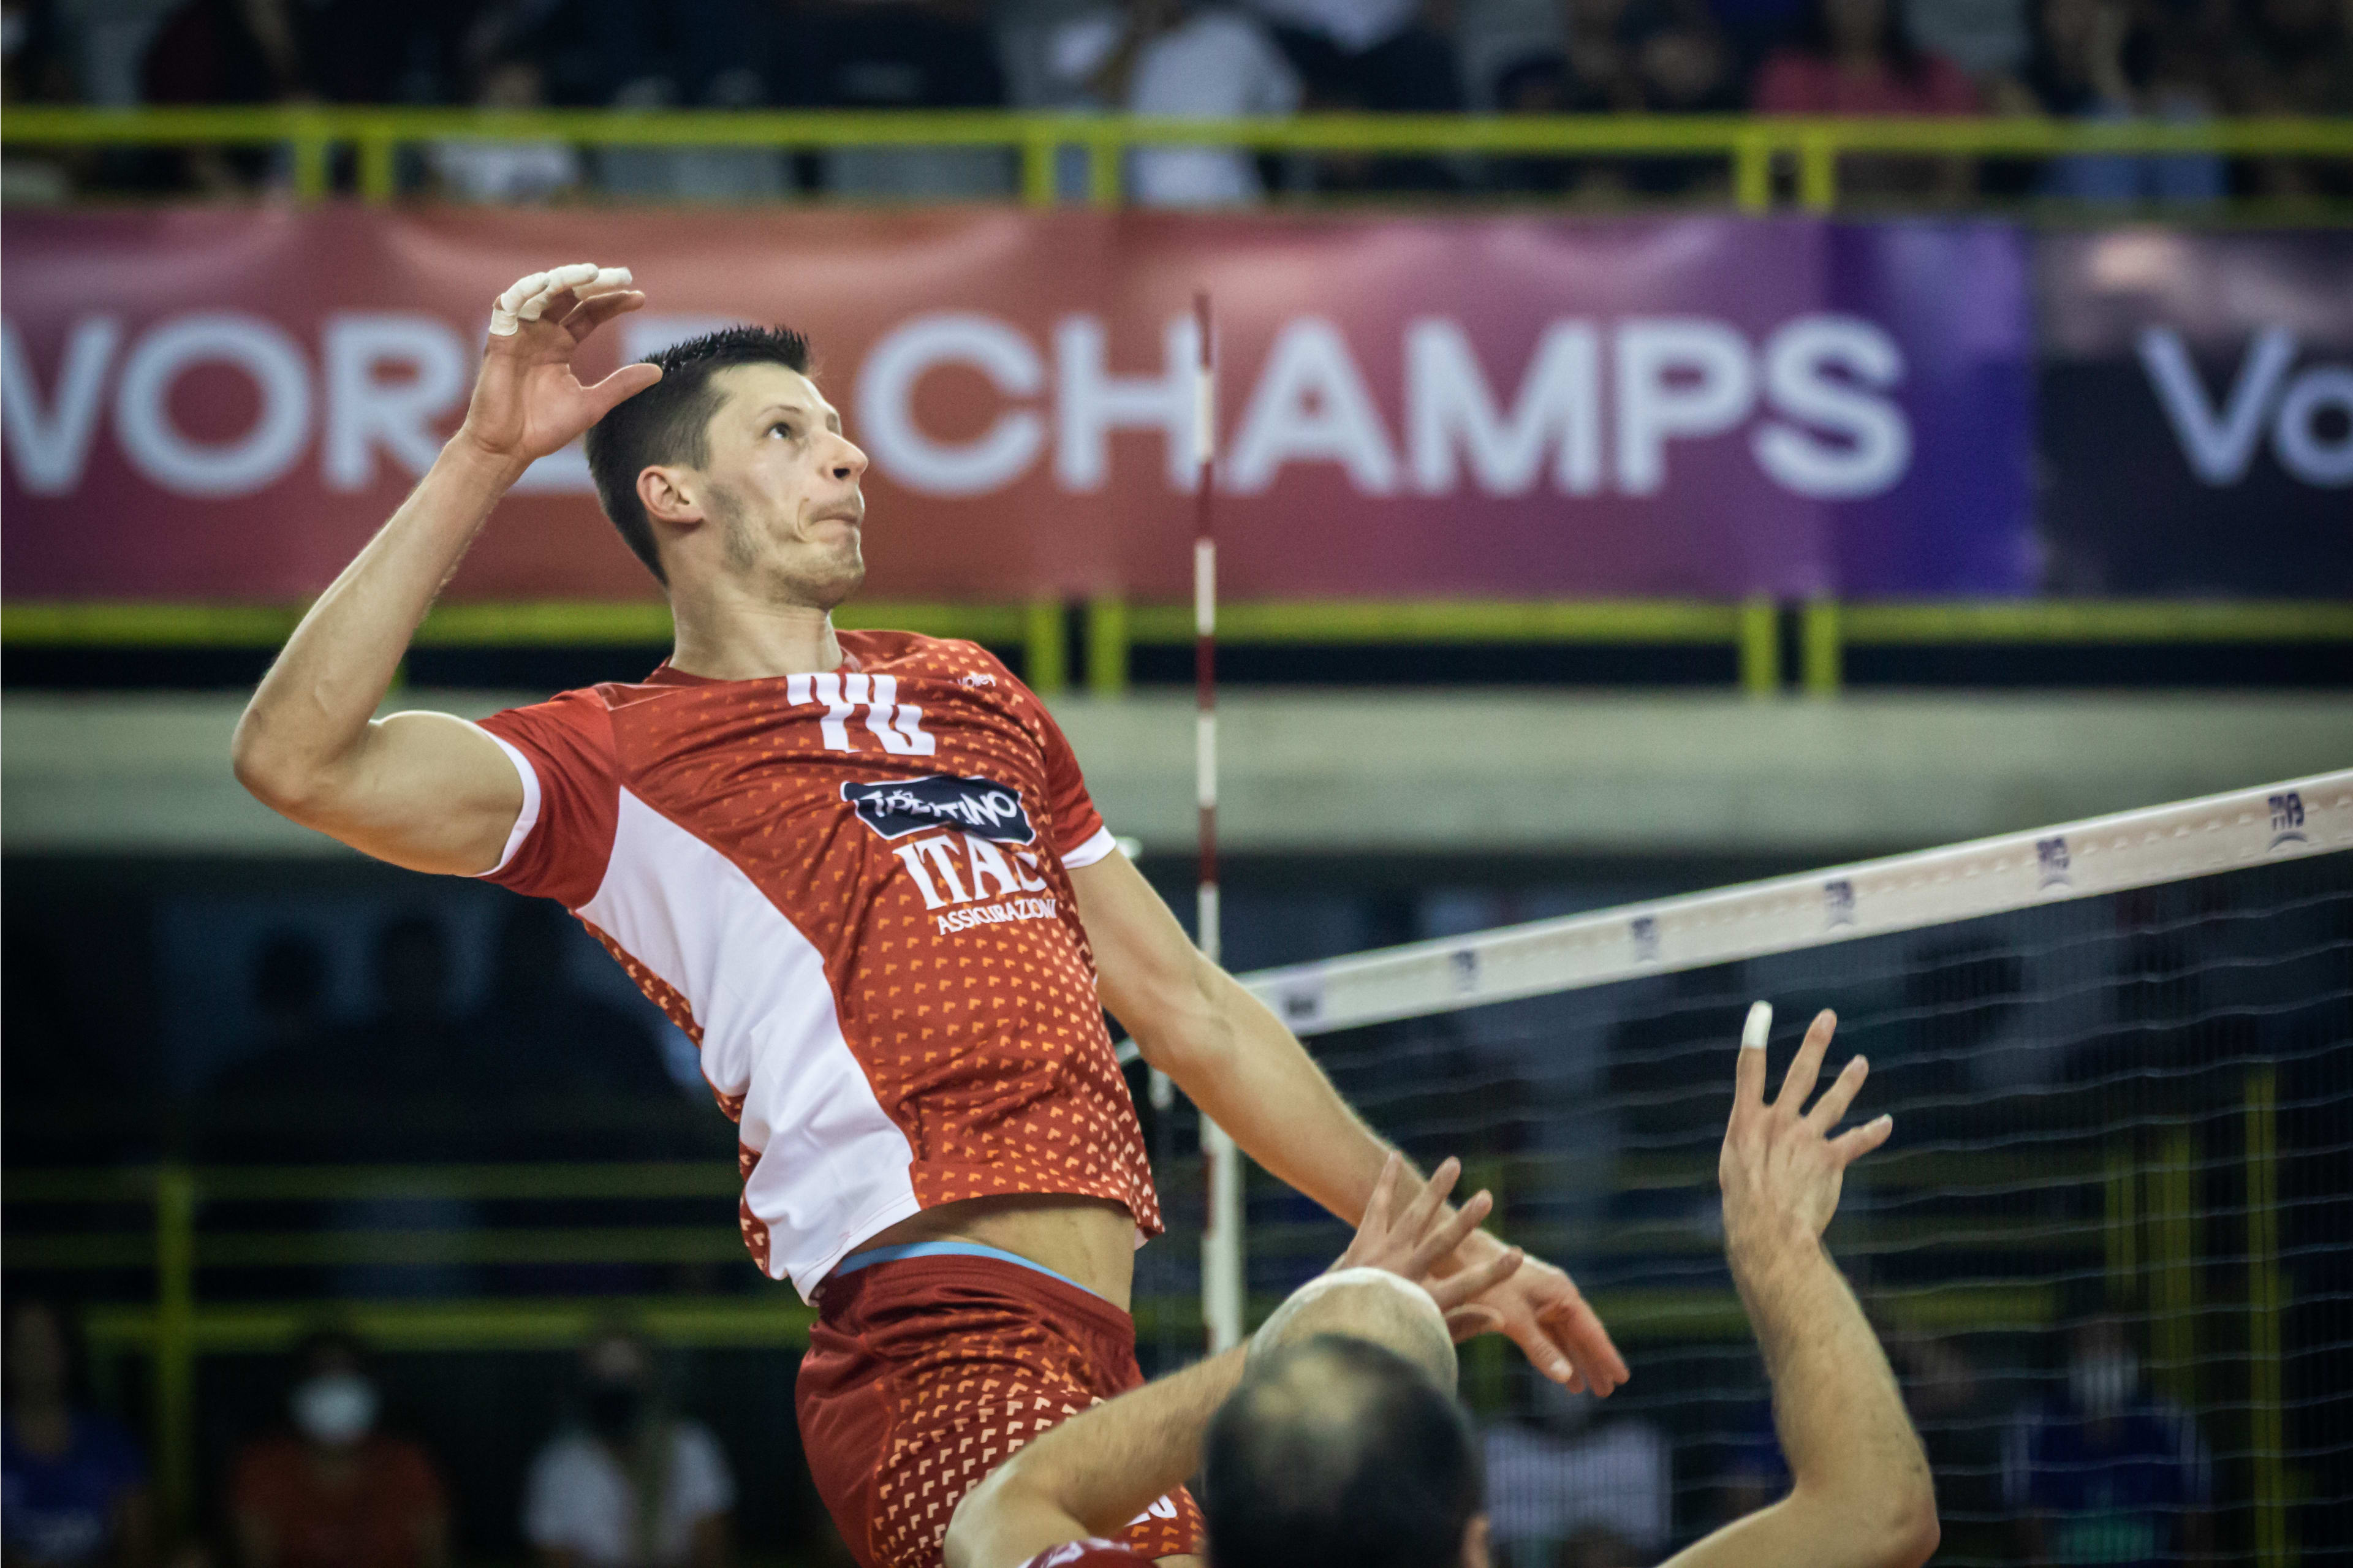 Where to watch the Club World Champs volleyballworld